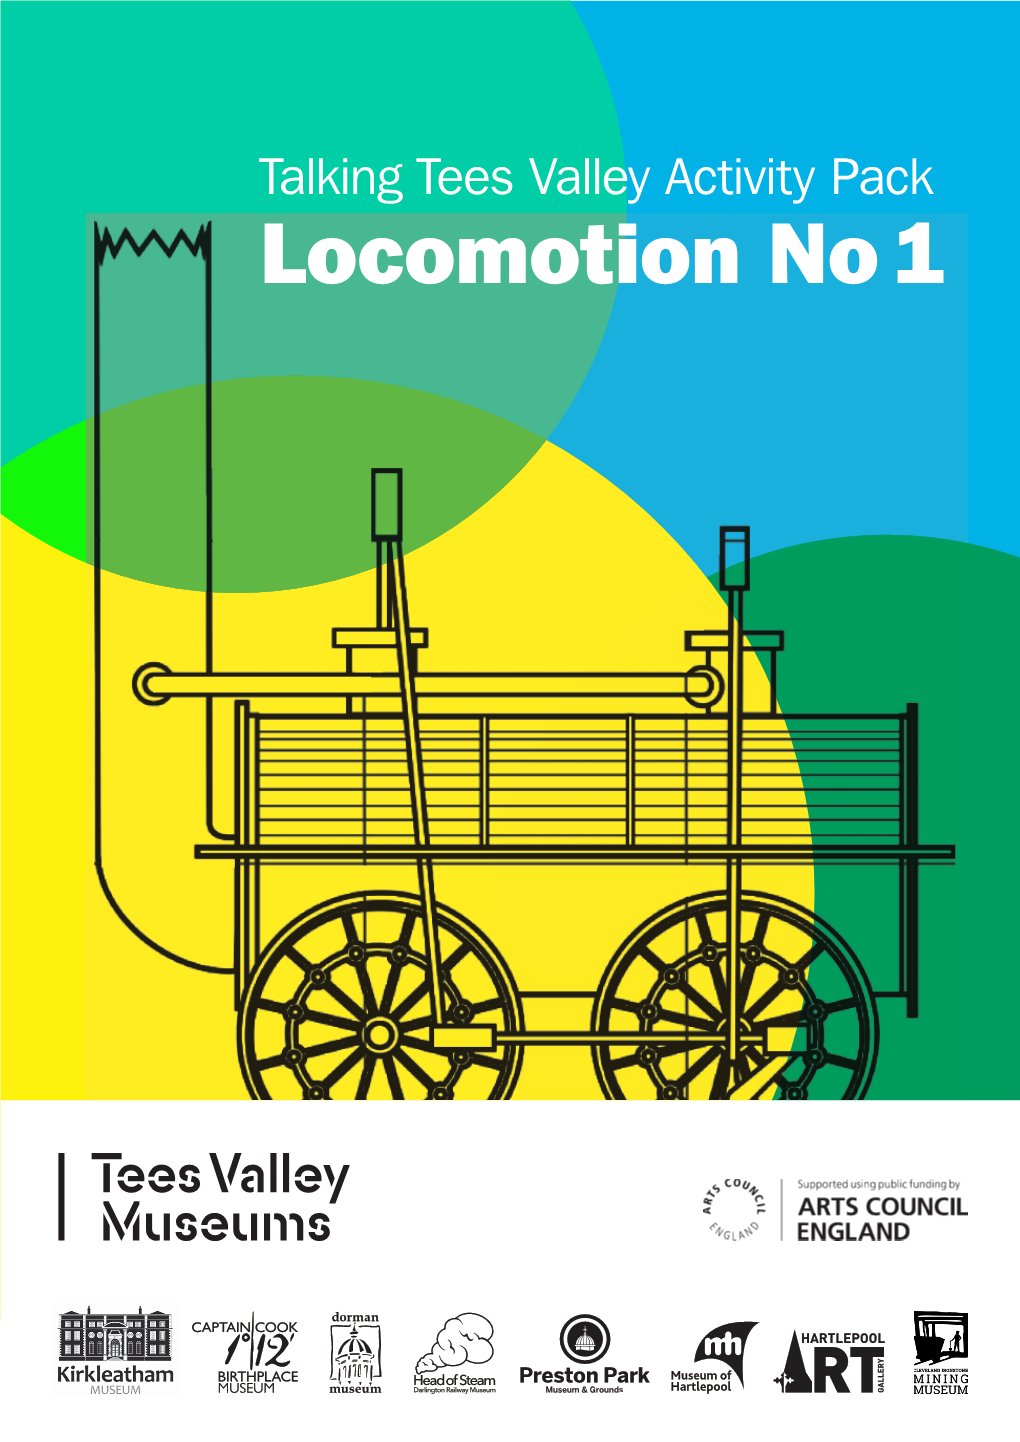 Locomotion No 1 Welcome to the Second Edition of the Talking Tees Valley Activity Pack